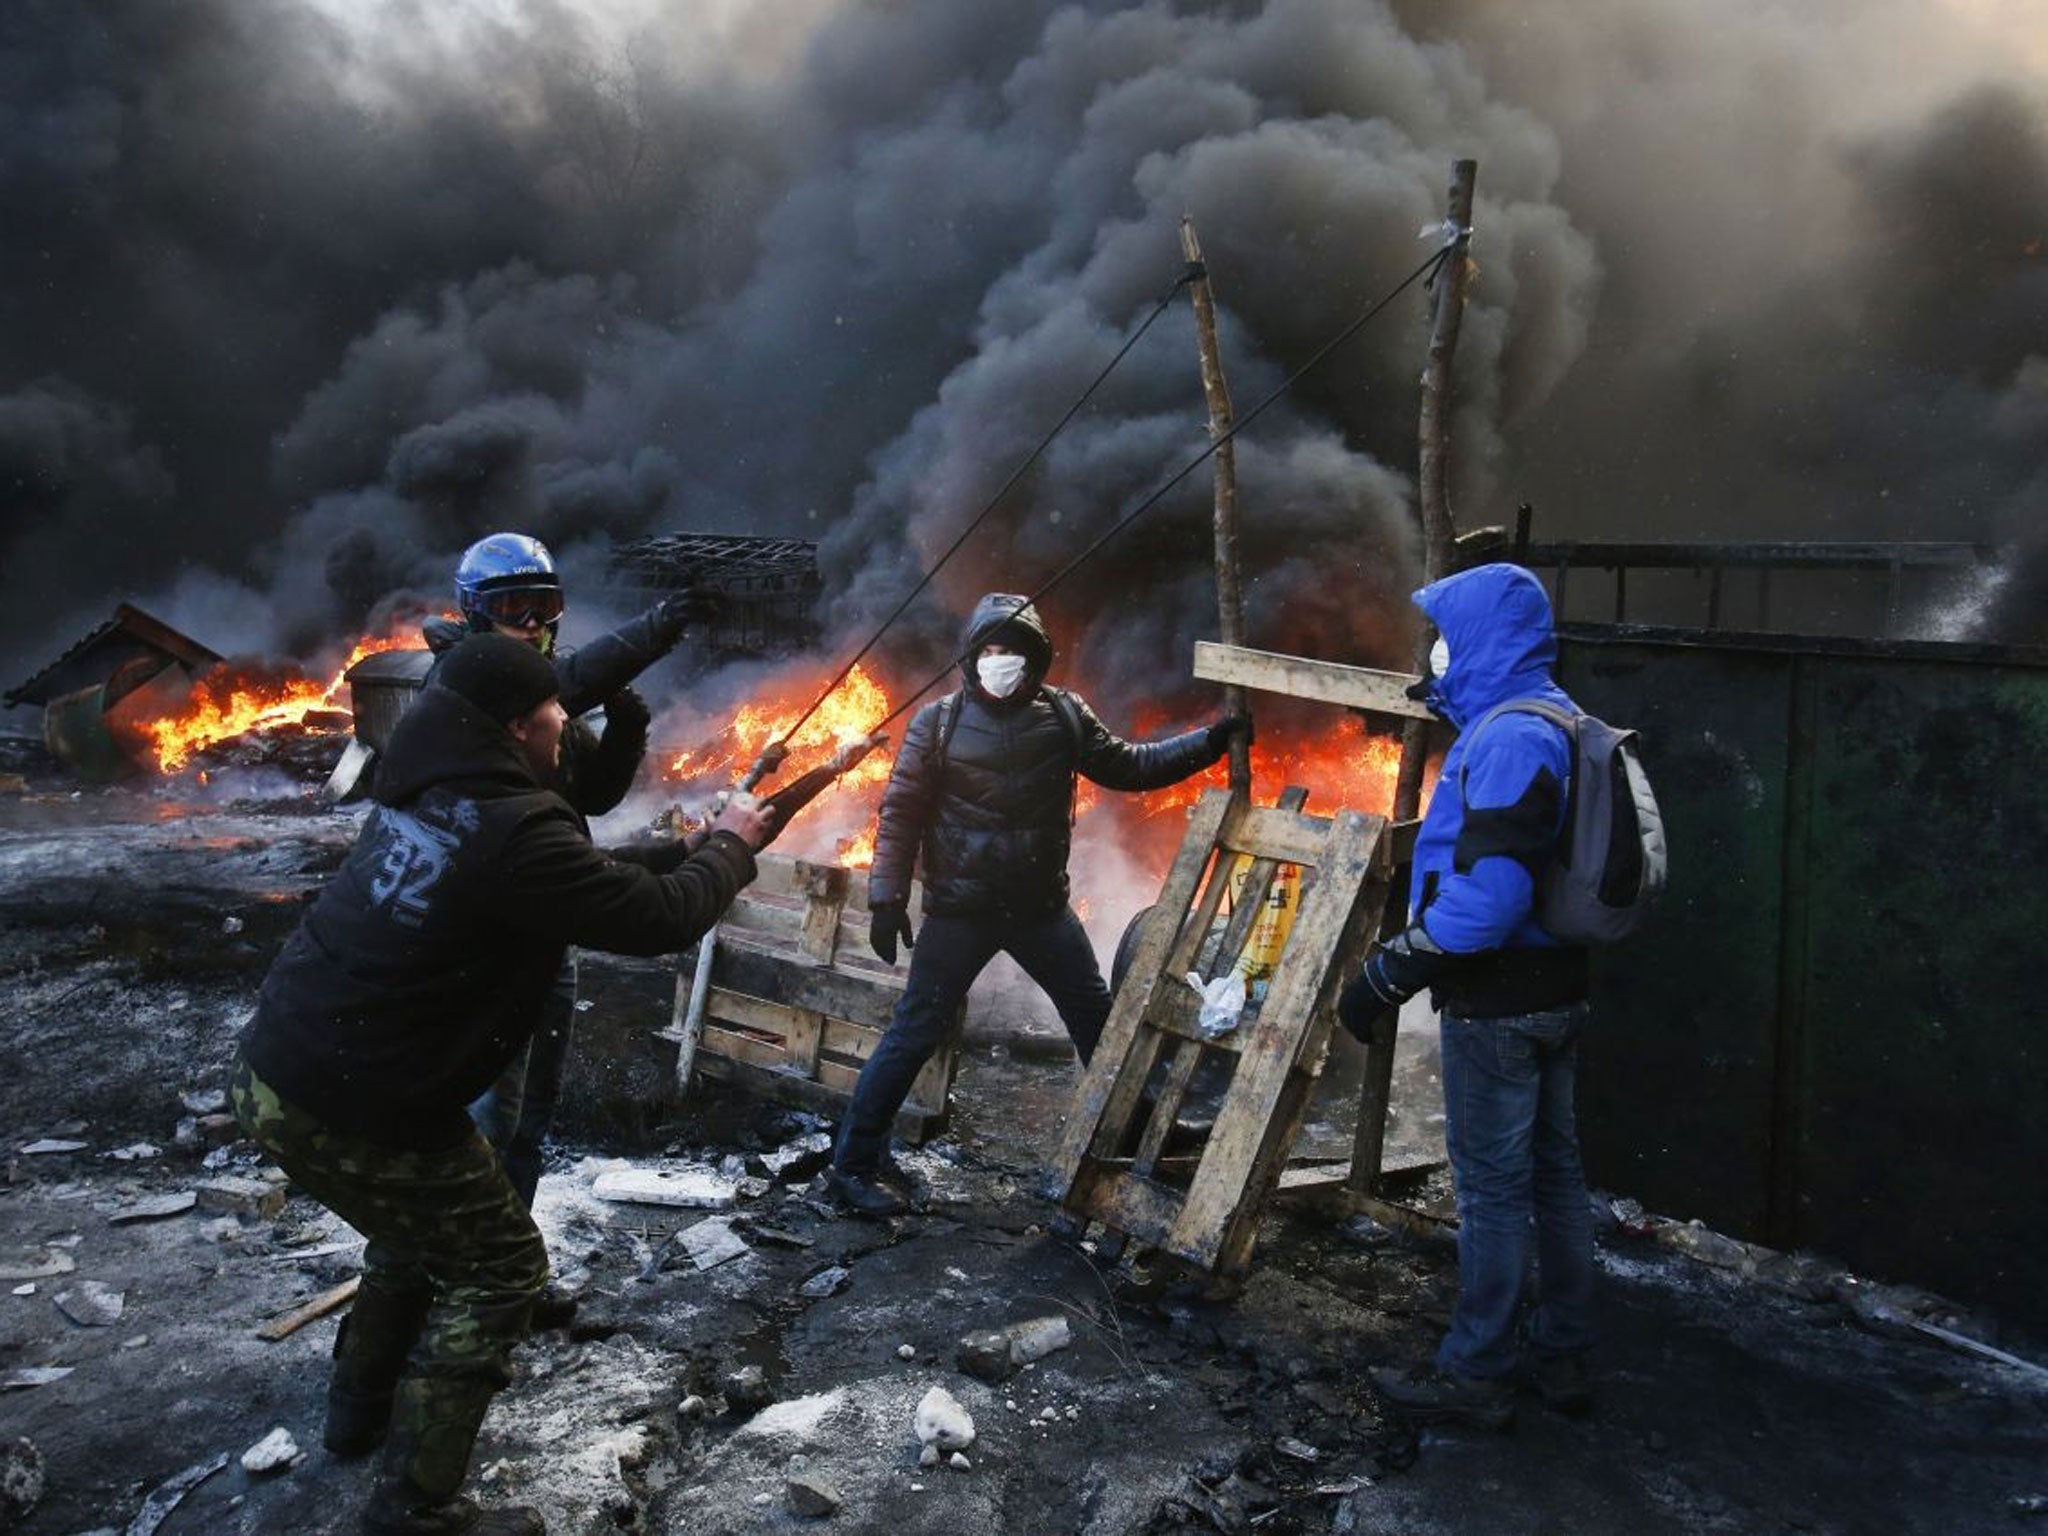 Thick black smoke from burning tires engulfed parts of downtown Kiev as an ultimatum issued by the opposition to the president to call early election or face street rage was set to expire with no sign of a compromise